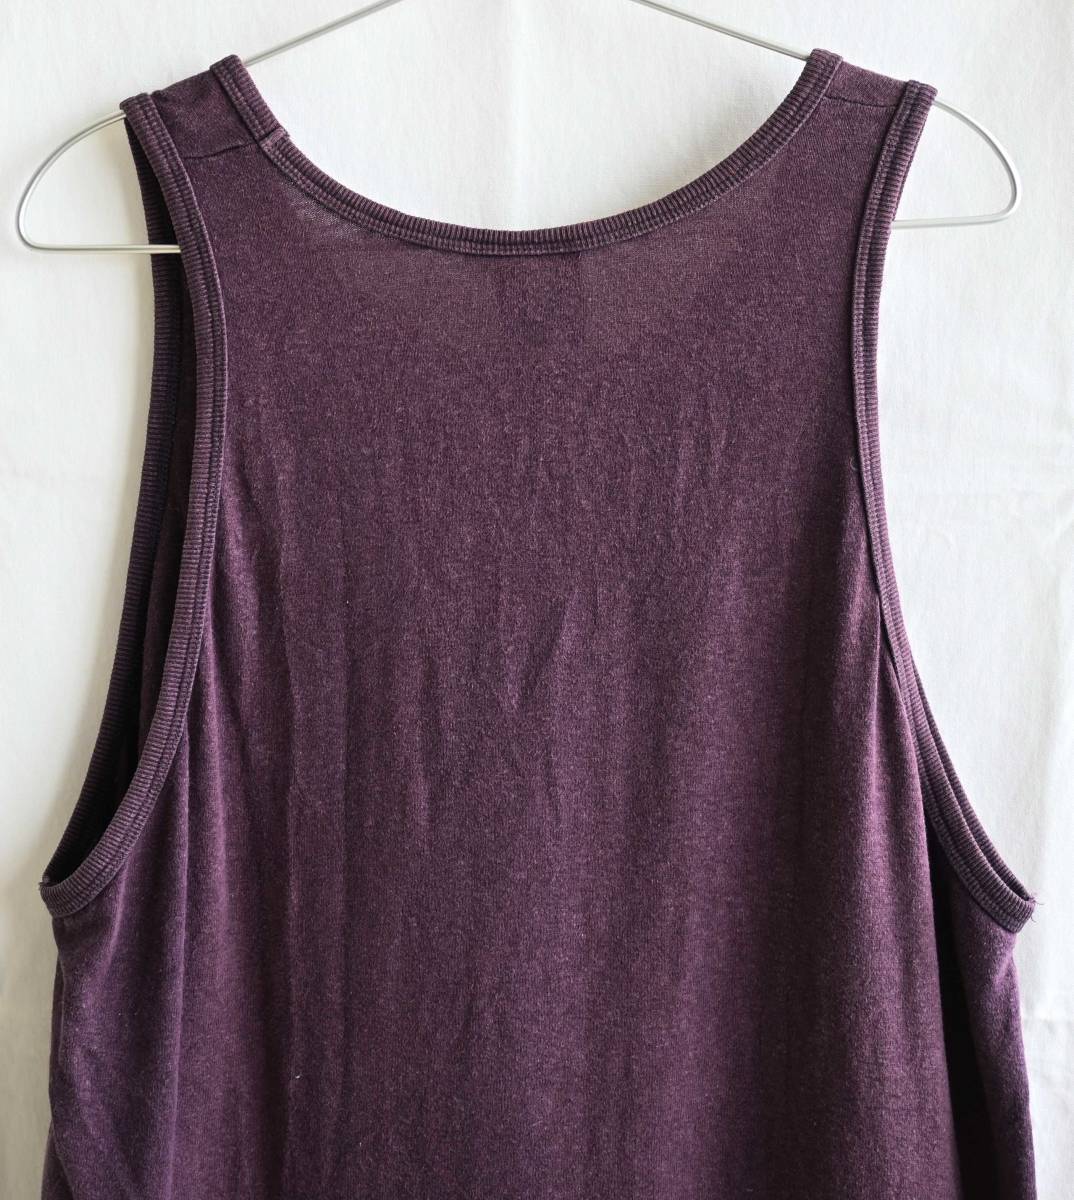  prompt decision [ Vintage / A HOPE HEMP]hemp× cotton over large tank top /M/eg plan to/2000 year about. model / organic / flax 